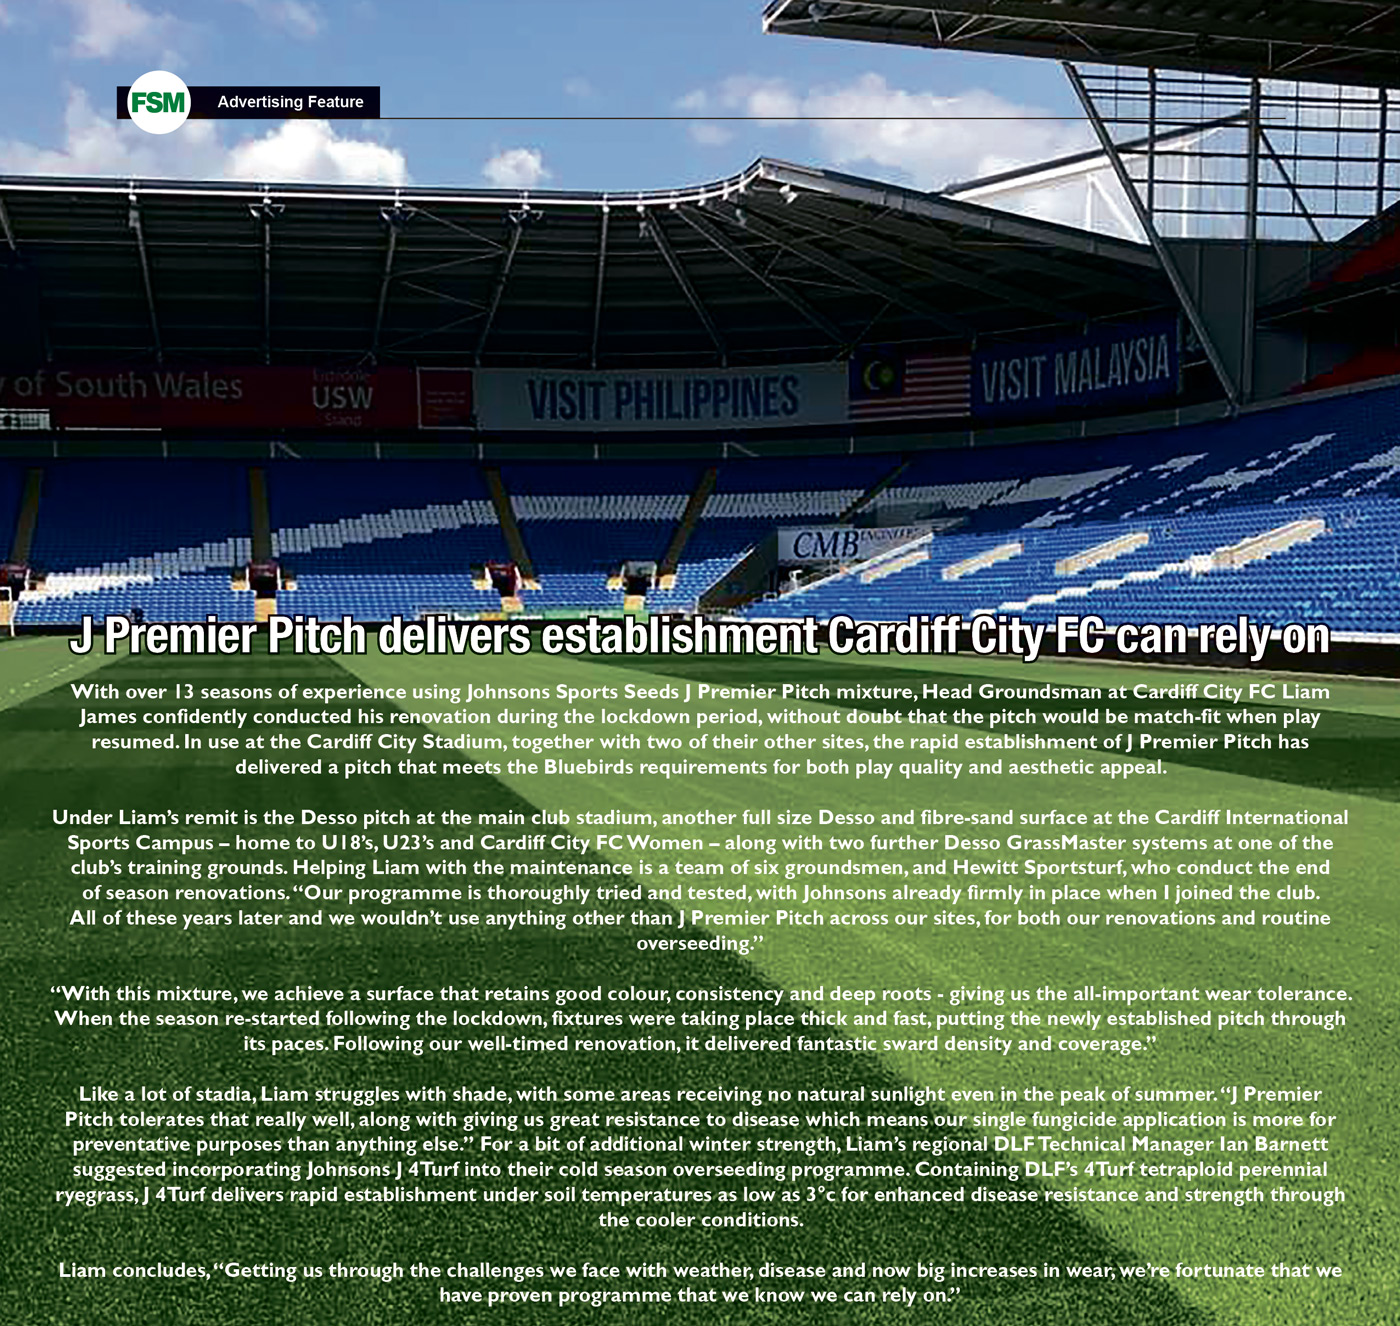 J Premier Pitch Delivers Establishment Cardiff City FC Can Rely On